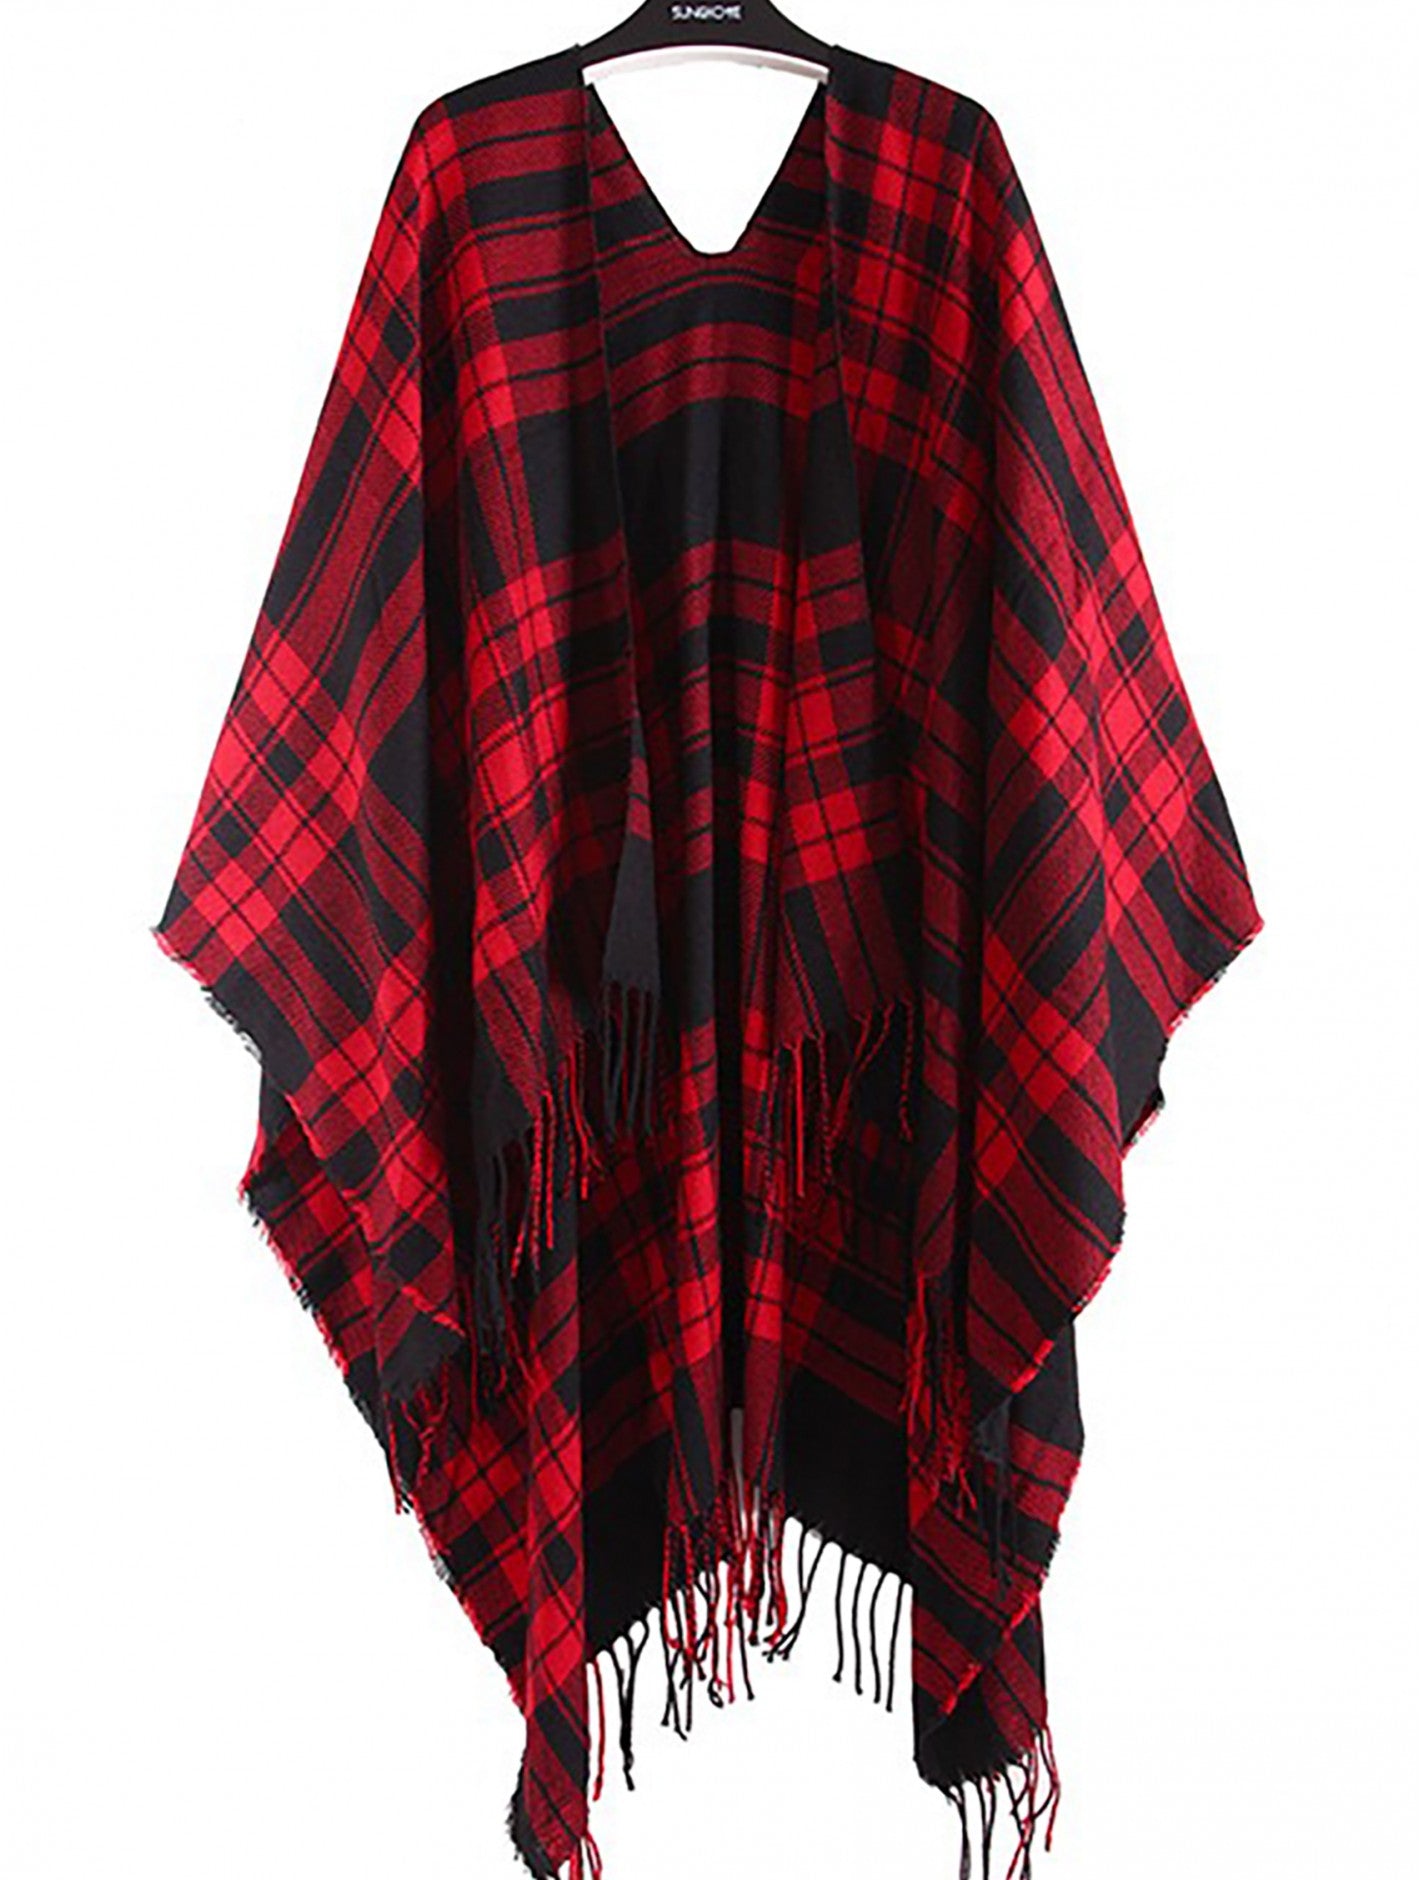 Poncho - Open Front Plaid